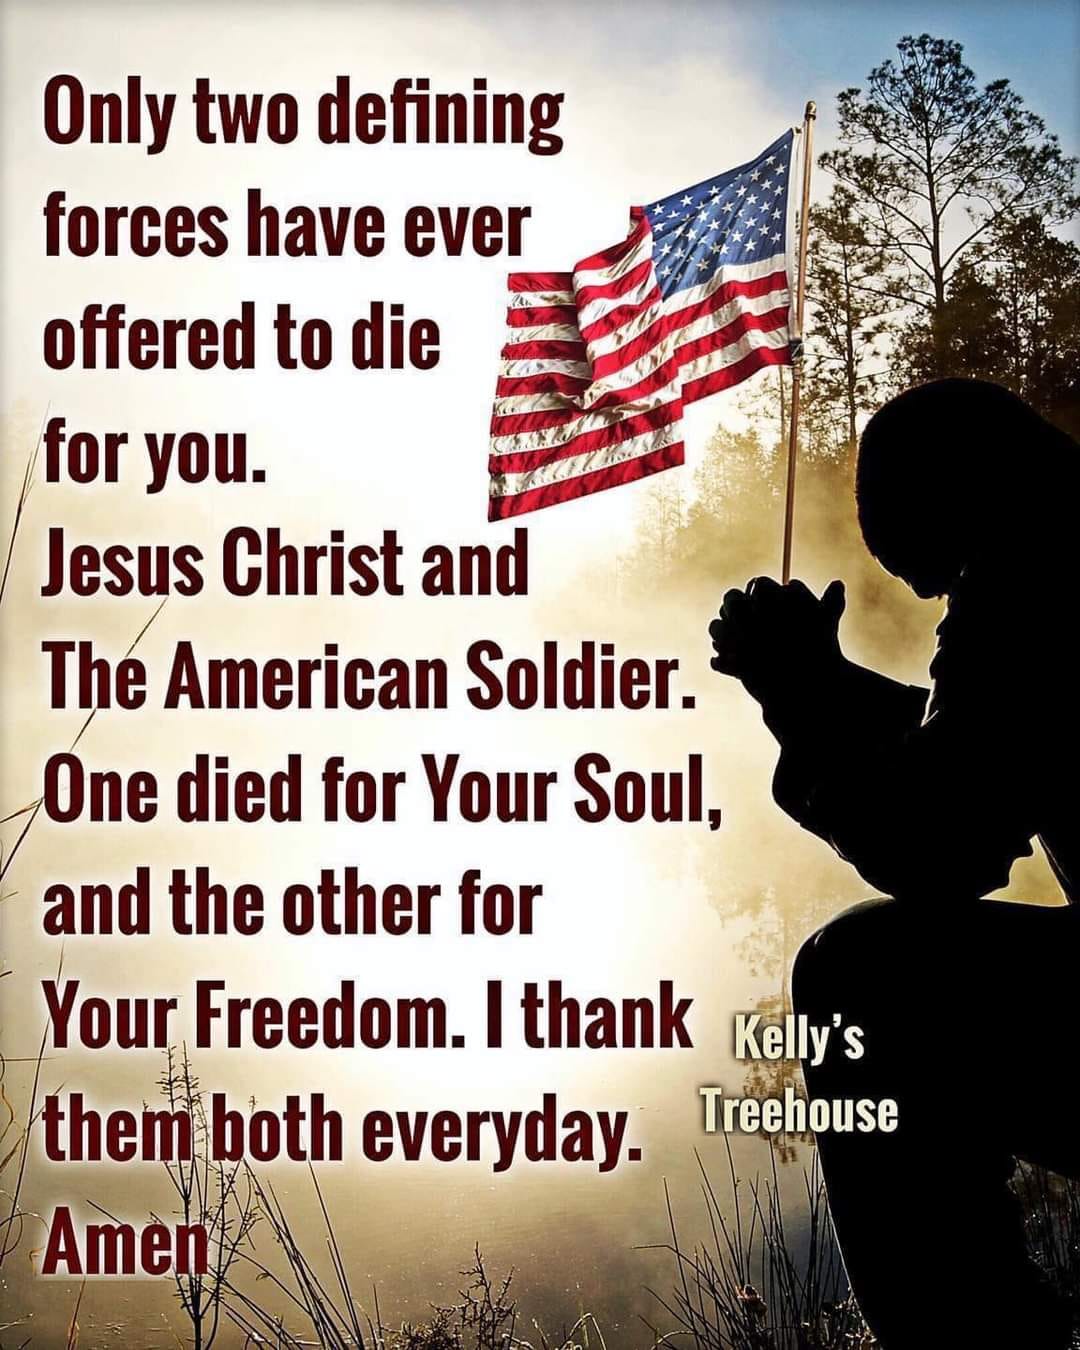 May be an image of 1 person and text that says 'Only two defining forces have ever offered to die for you. Jesus Christ and The American Soldier. One died for Your Soul, and the other for Your Freedom. I thank Kelly's S them both everyday. Treehouse Amen'